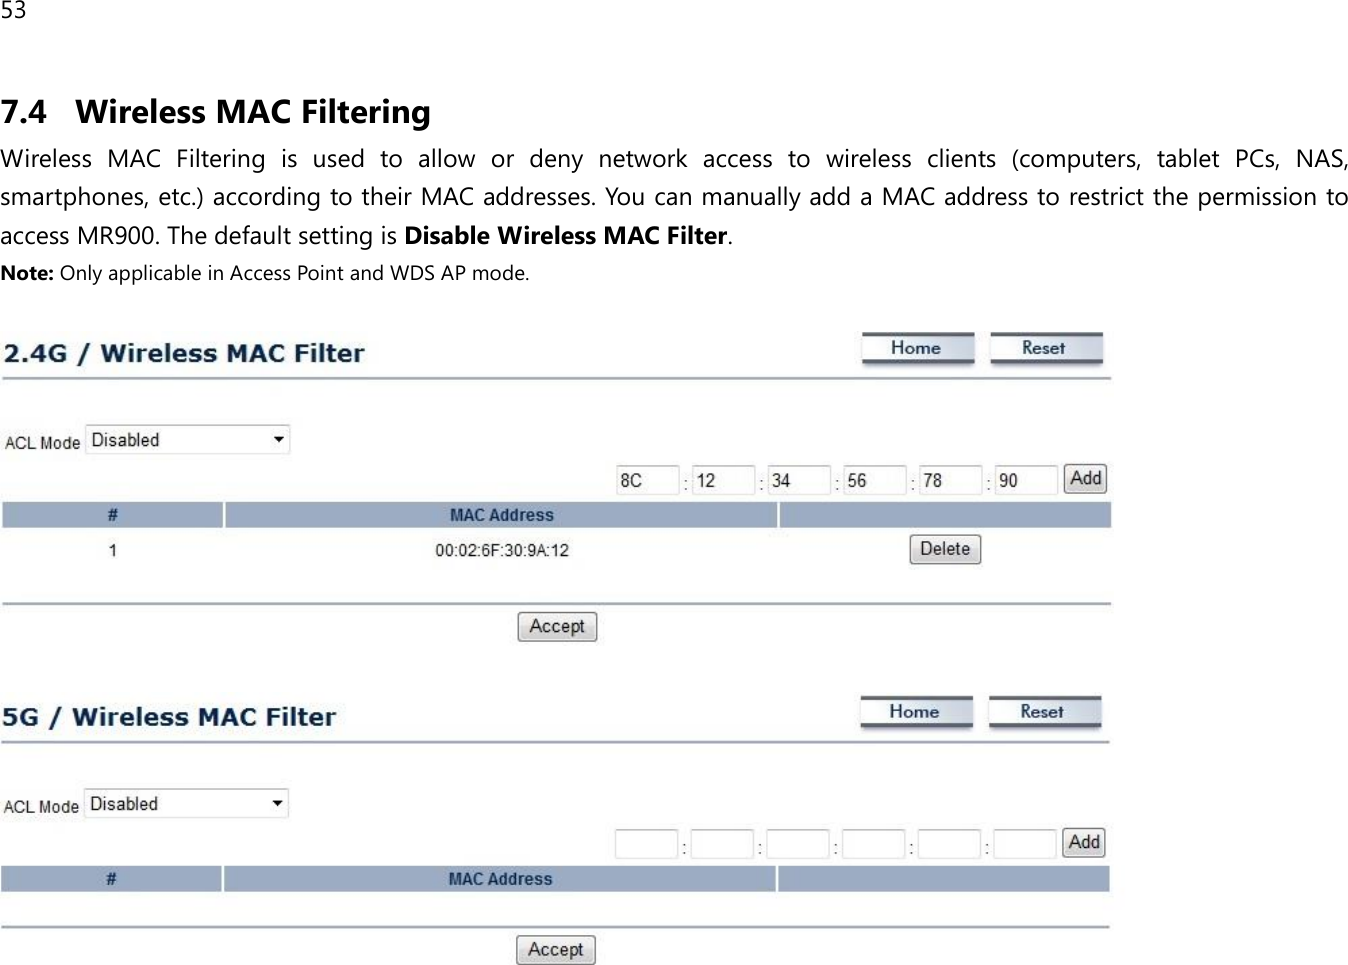 53 7.4 Wireless MAC Filtering Wireless  MAC  Filtering  is  used  to  allow  or  deny  network  access  to  wireless  clients  (computers,  tablet  PCs,  NAS, smartphones, etc.) according to their MAC addresses. You can manually add a MAC address to restrict the permission to access MR900. The default setting is Disable Wireless MAC Filter. Note: Only applicable in Access Point and WDS AP mode.      